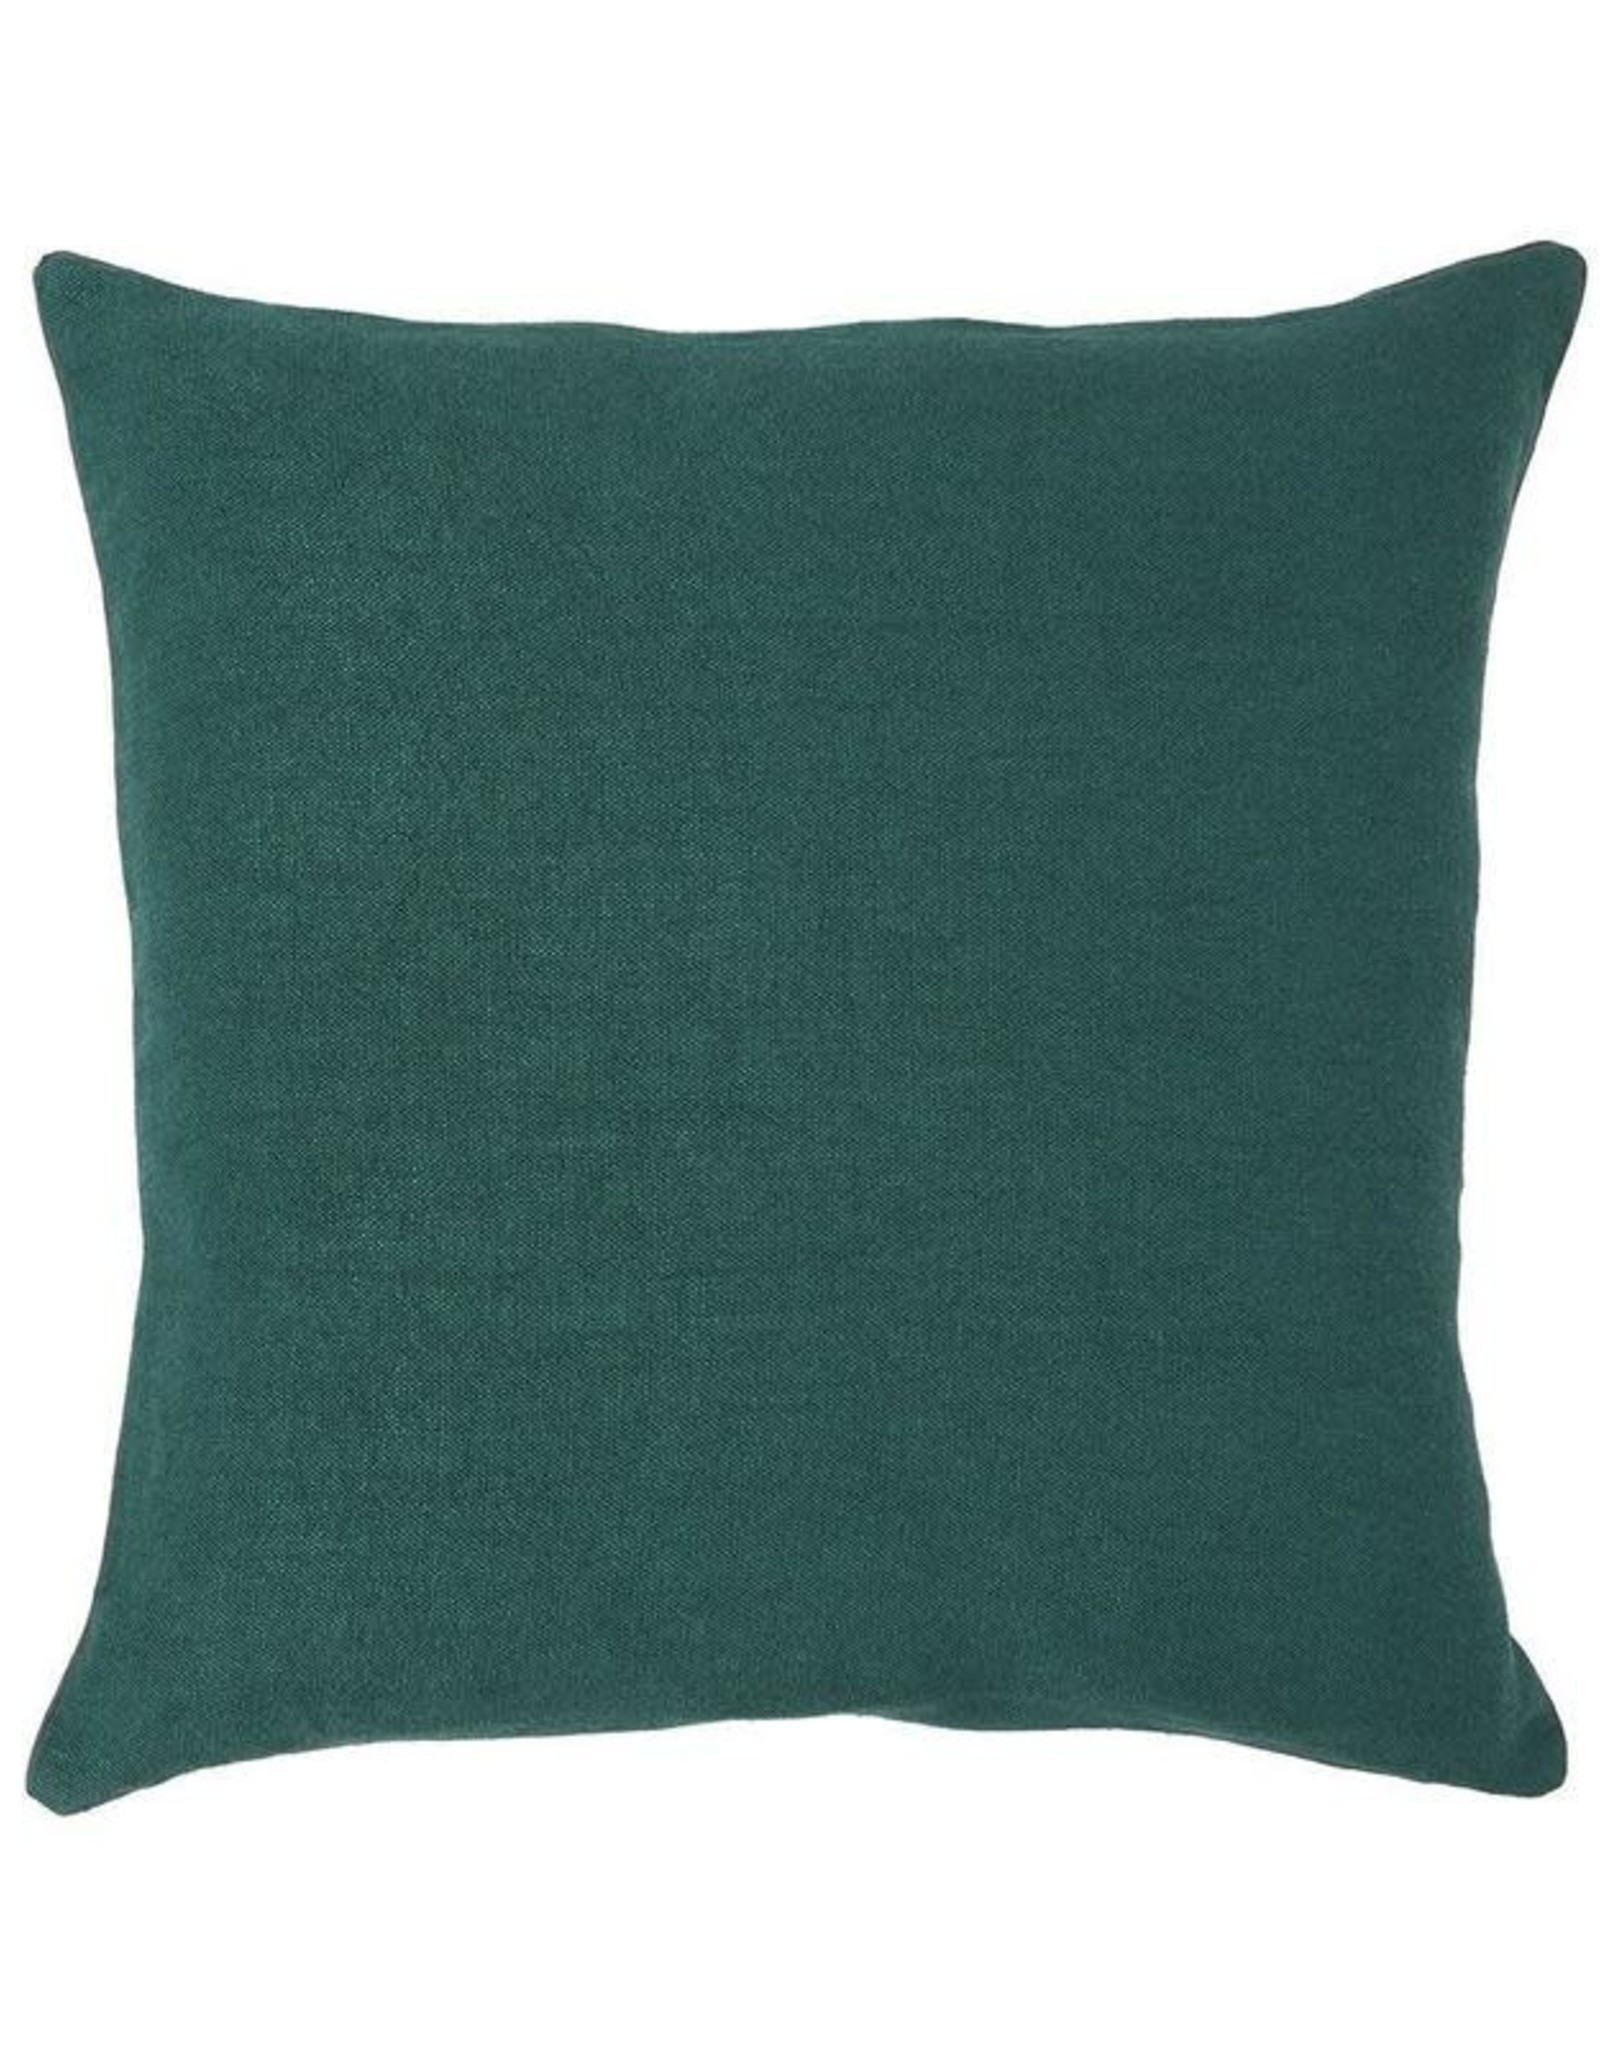 Pigment Decorative Pillow 18x18 by Iosis - Yves Delorme